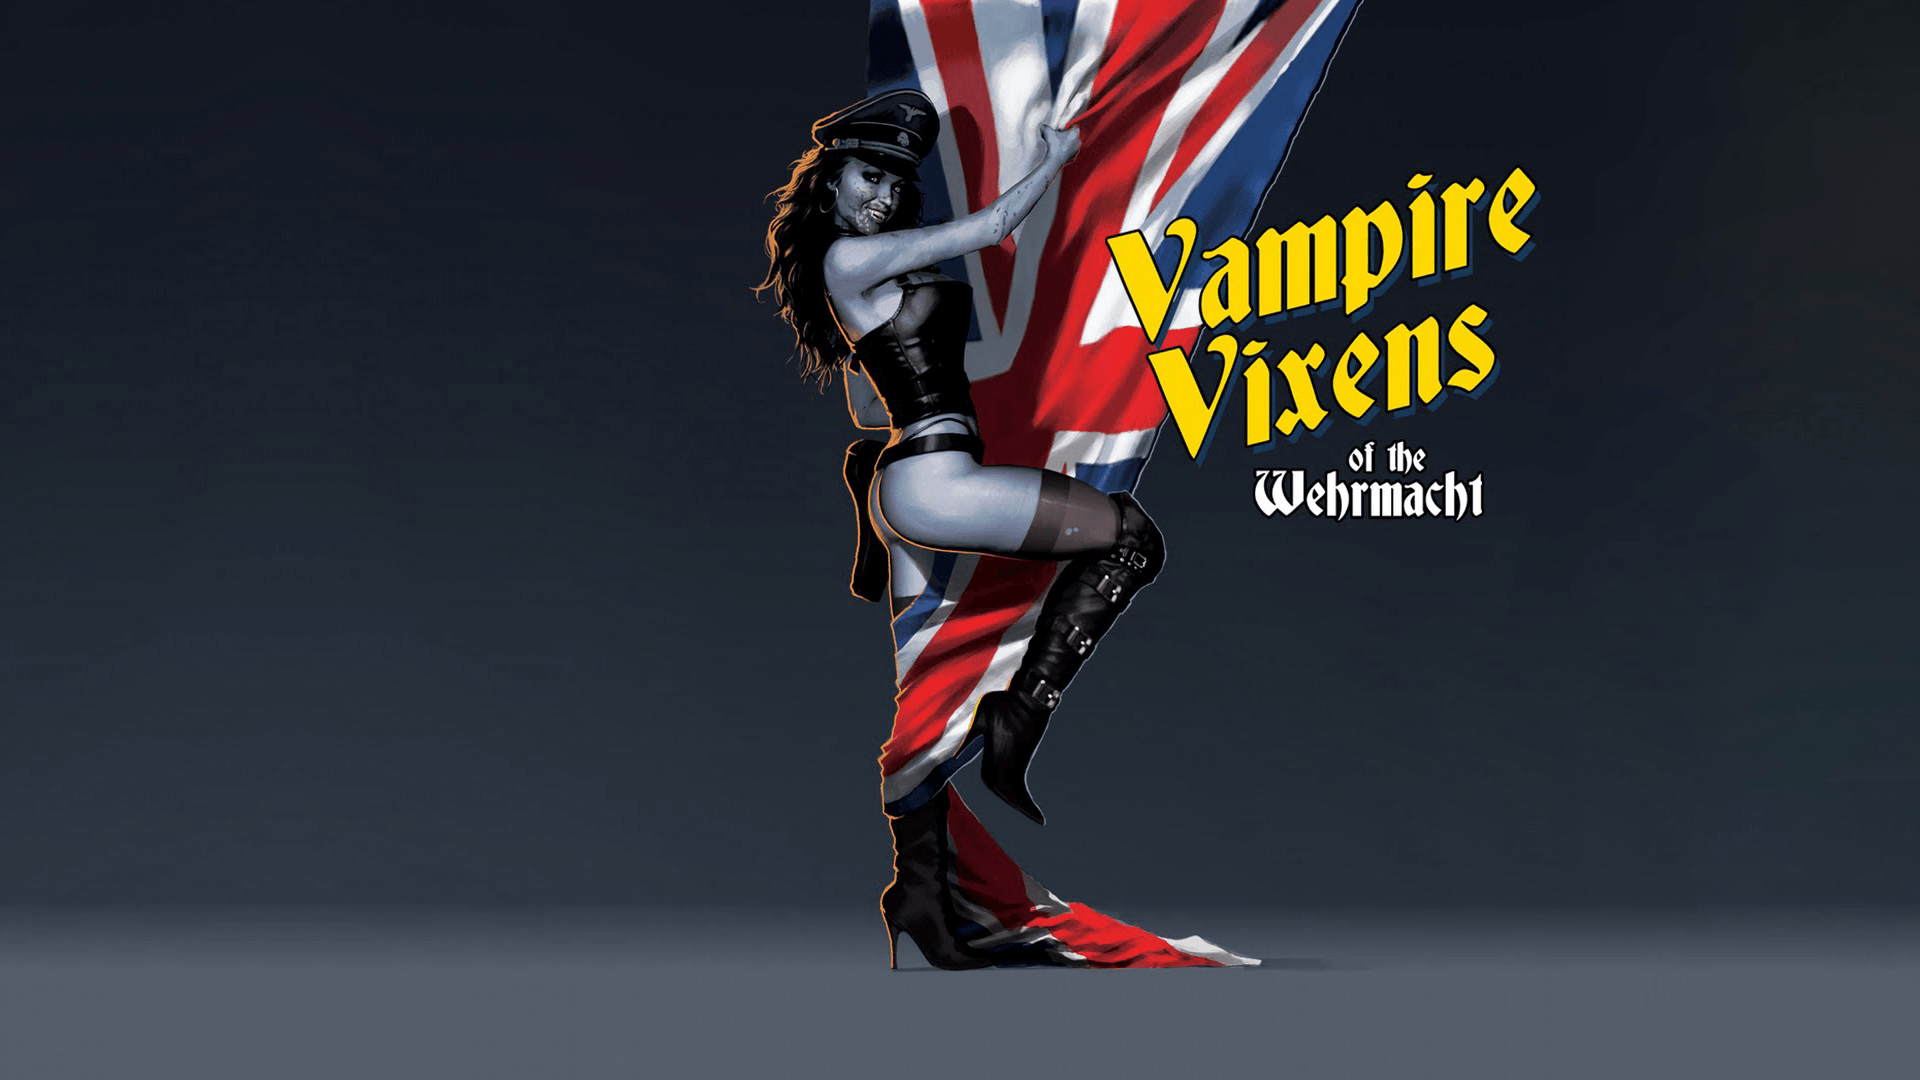 Vampire Vixens of the Wehrmacht Full HD Wallpaper and Background